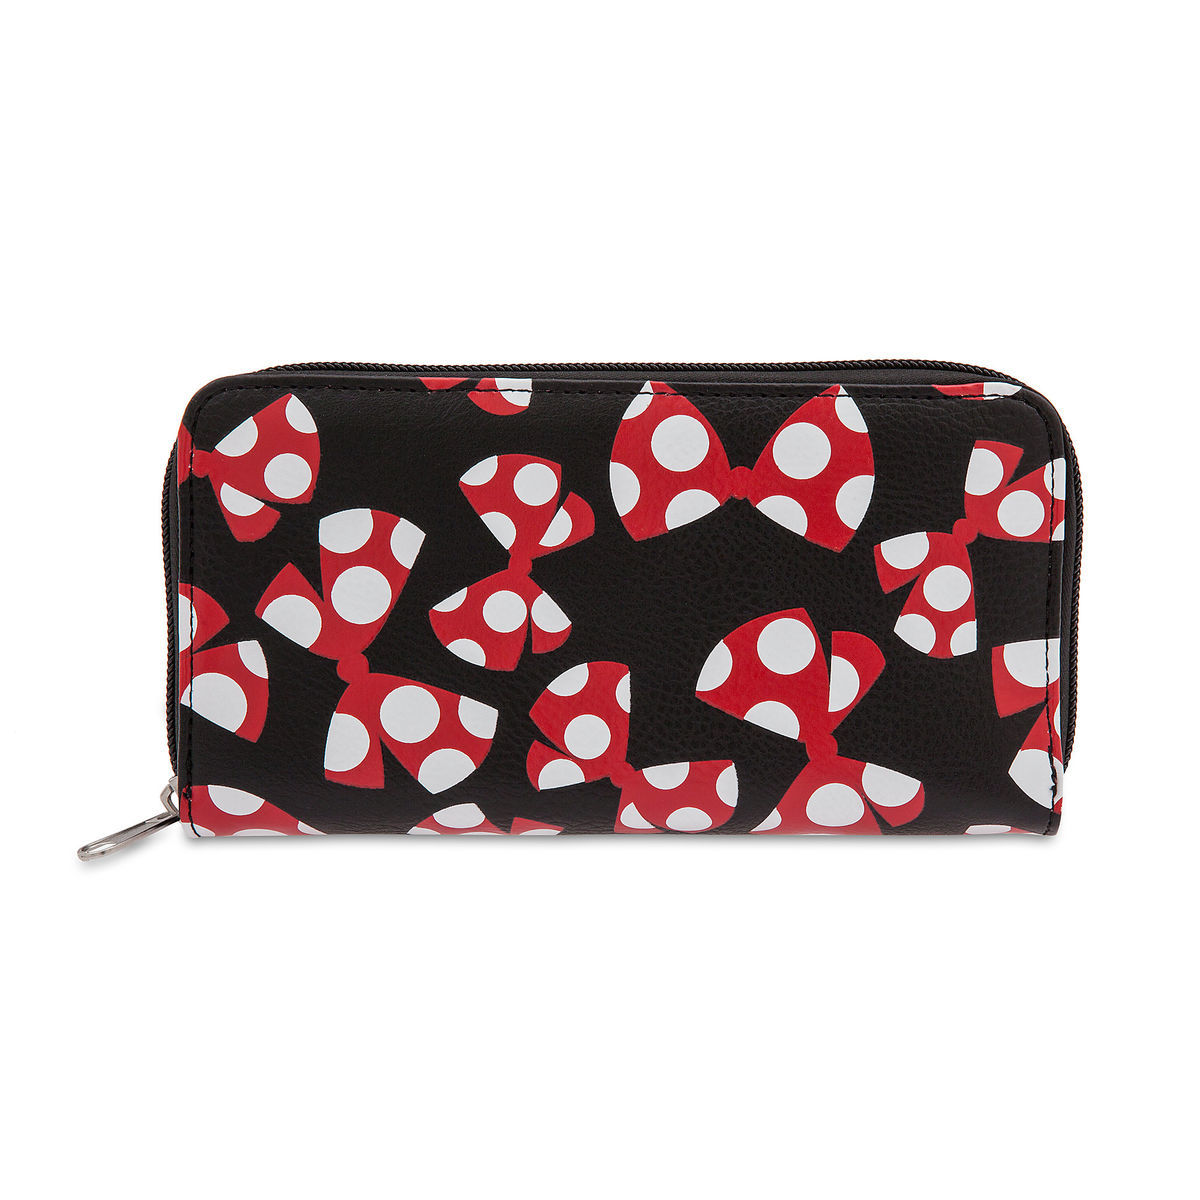 Disney Minnie Mouse Bow Wallet Polka Dot Bows Billfold Pockets New with Tags